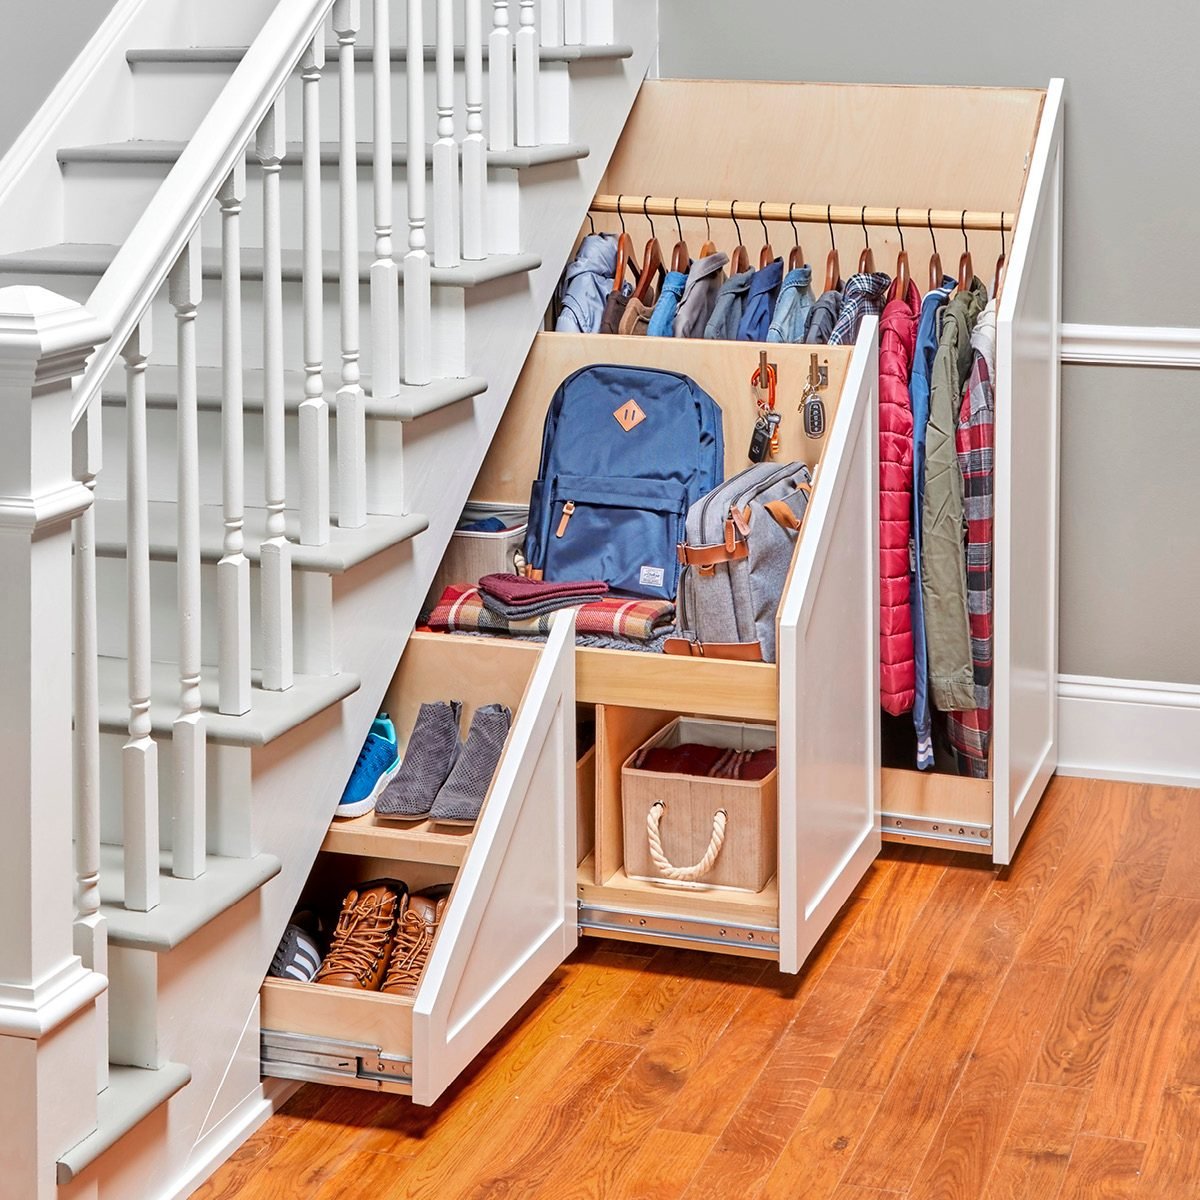 This Hidden  Section Has Storage and Organization Deals Up to 75% Off